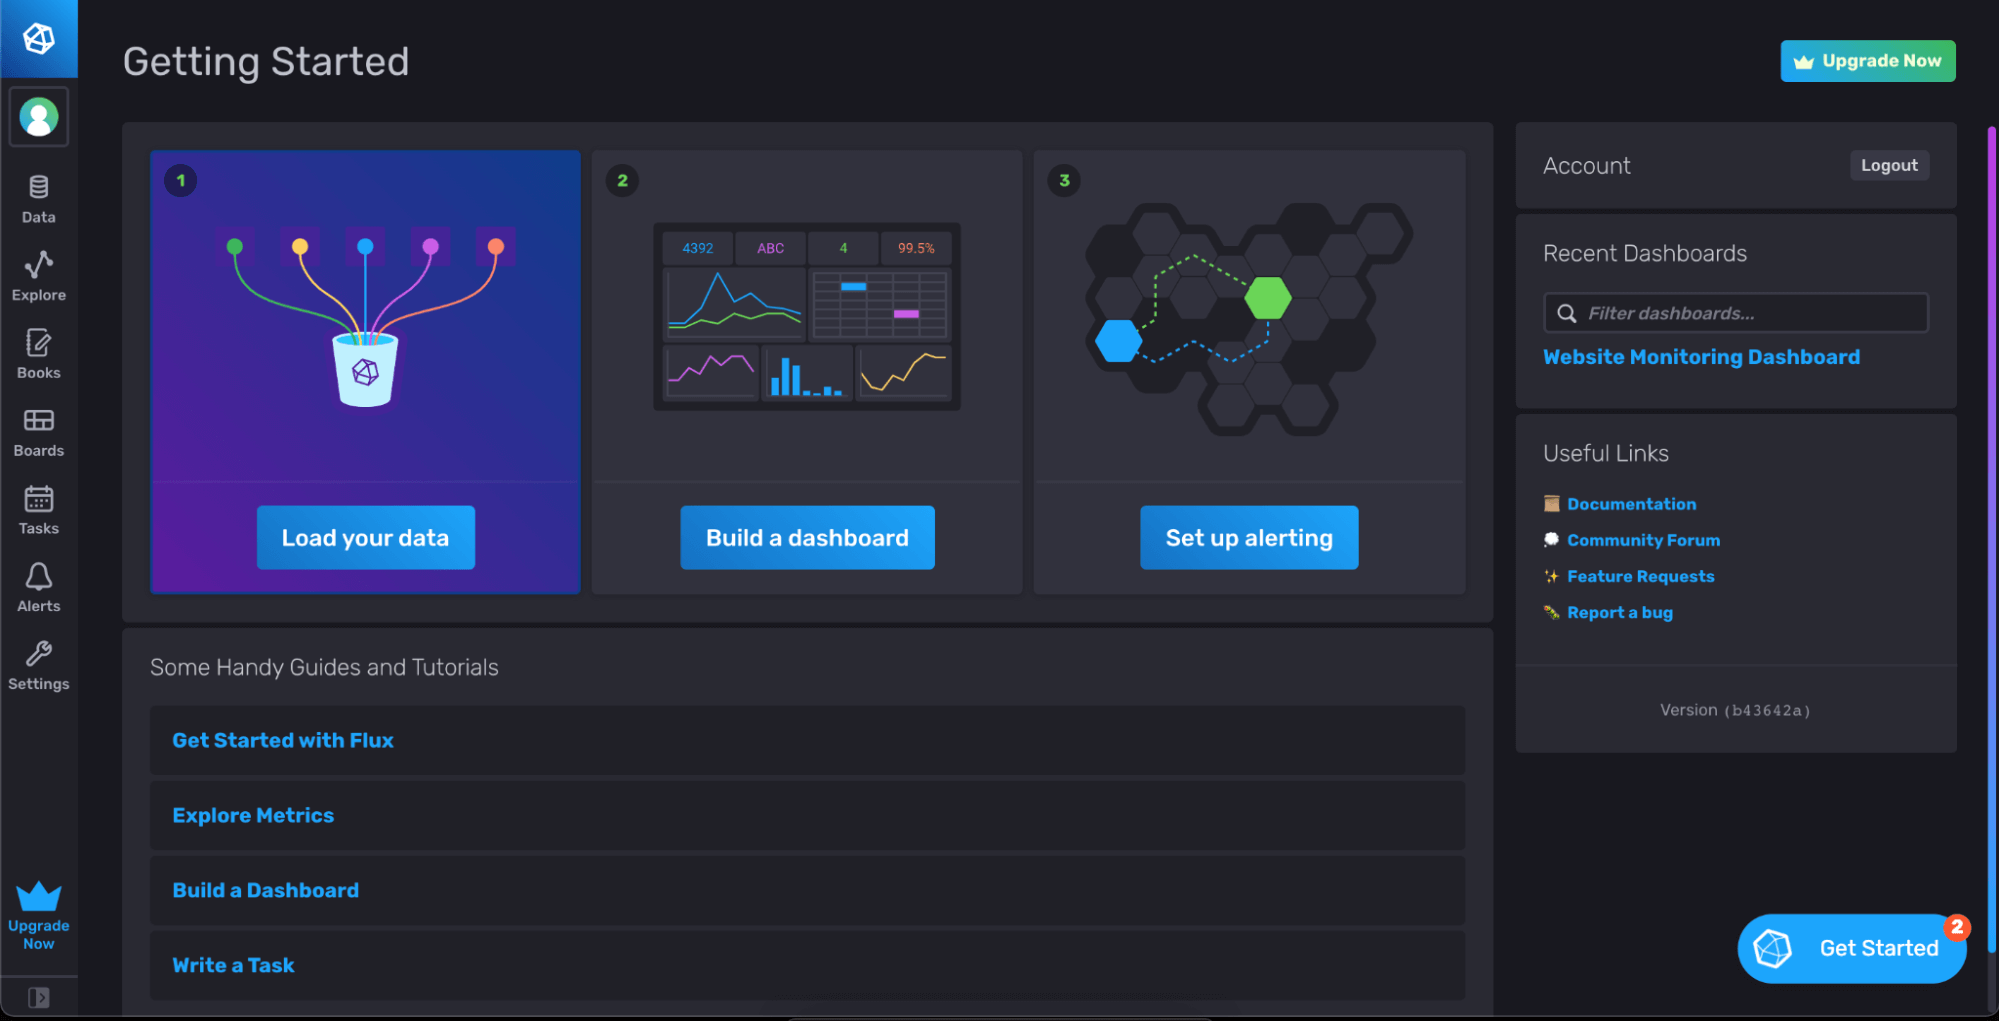 InfluxDB Cloud account - Getting Started